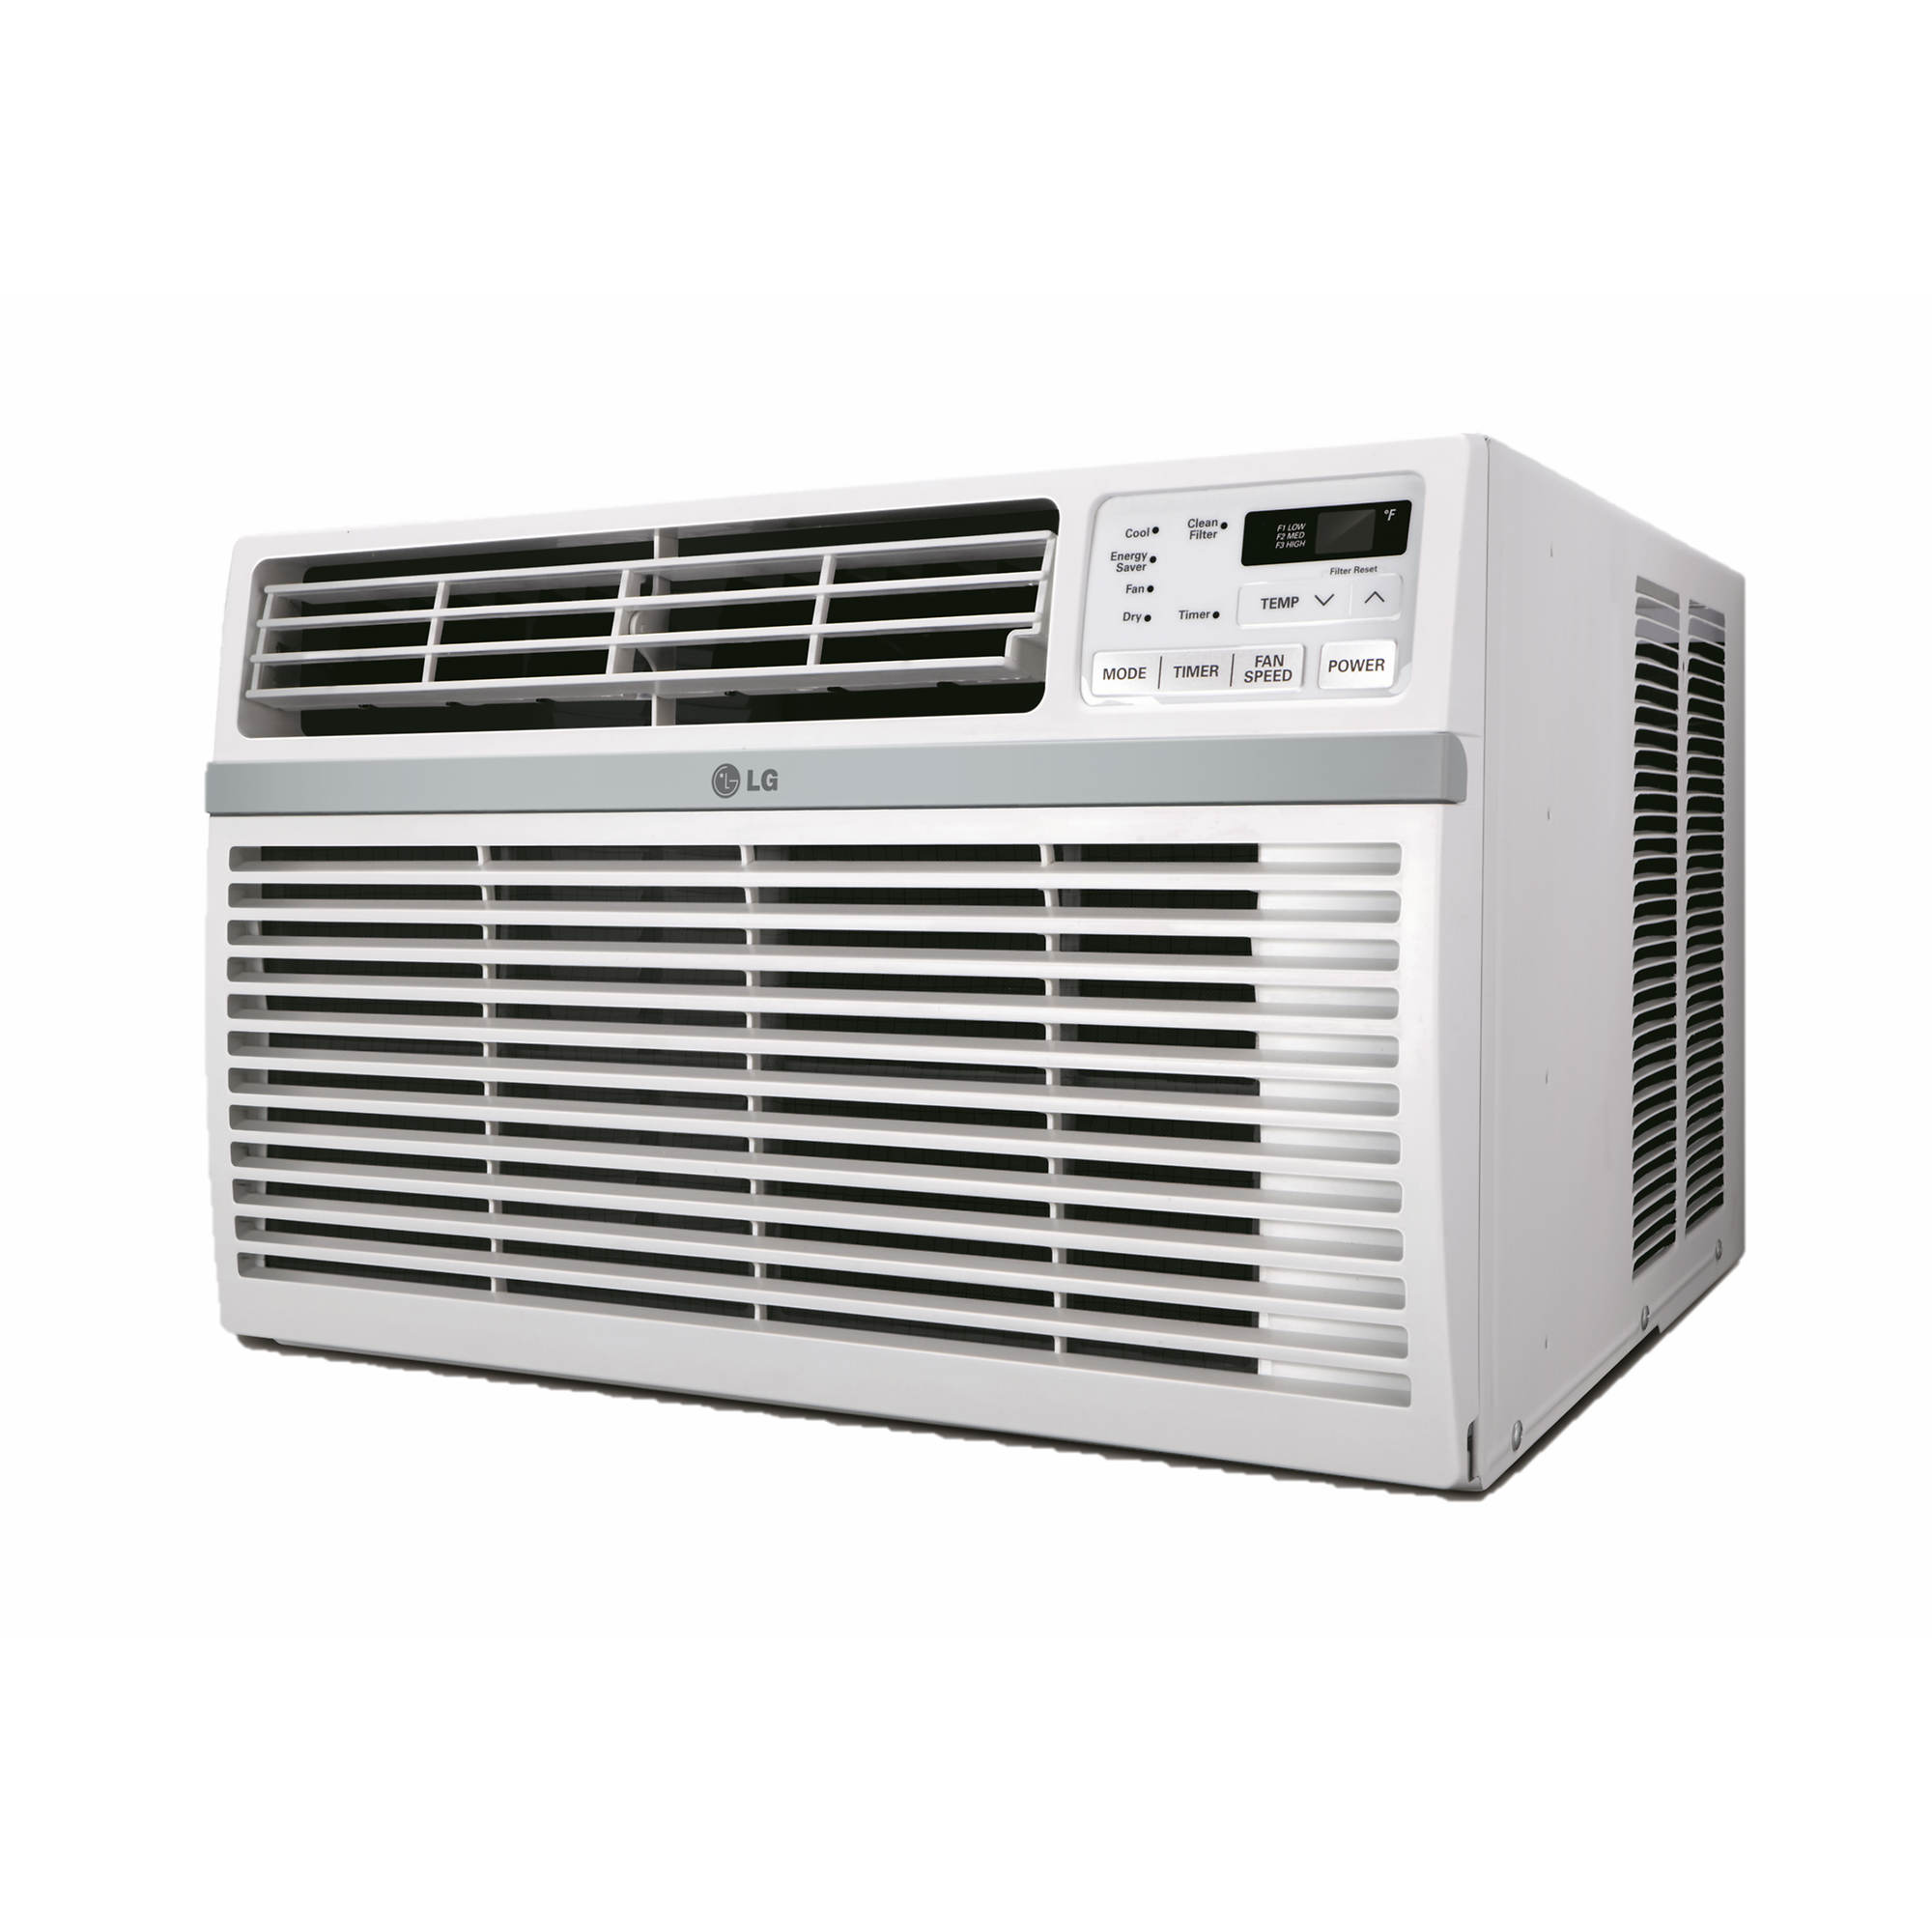 What is a 10000 BTU air conditioner?